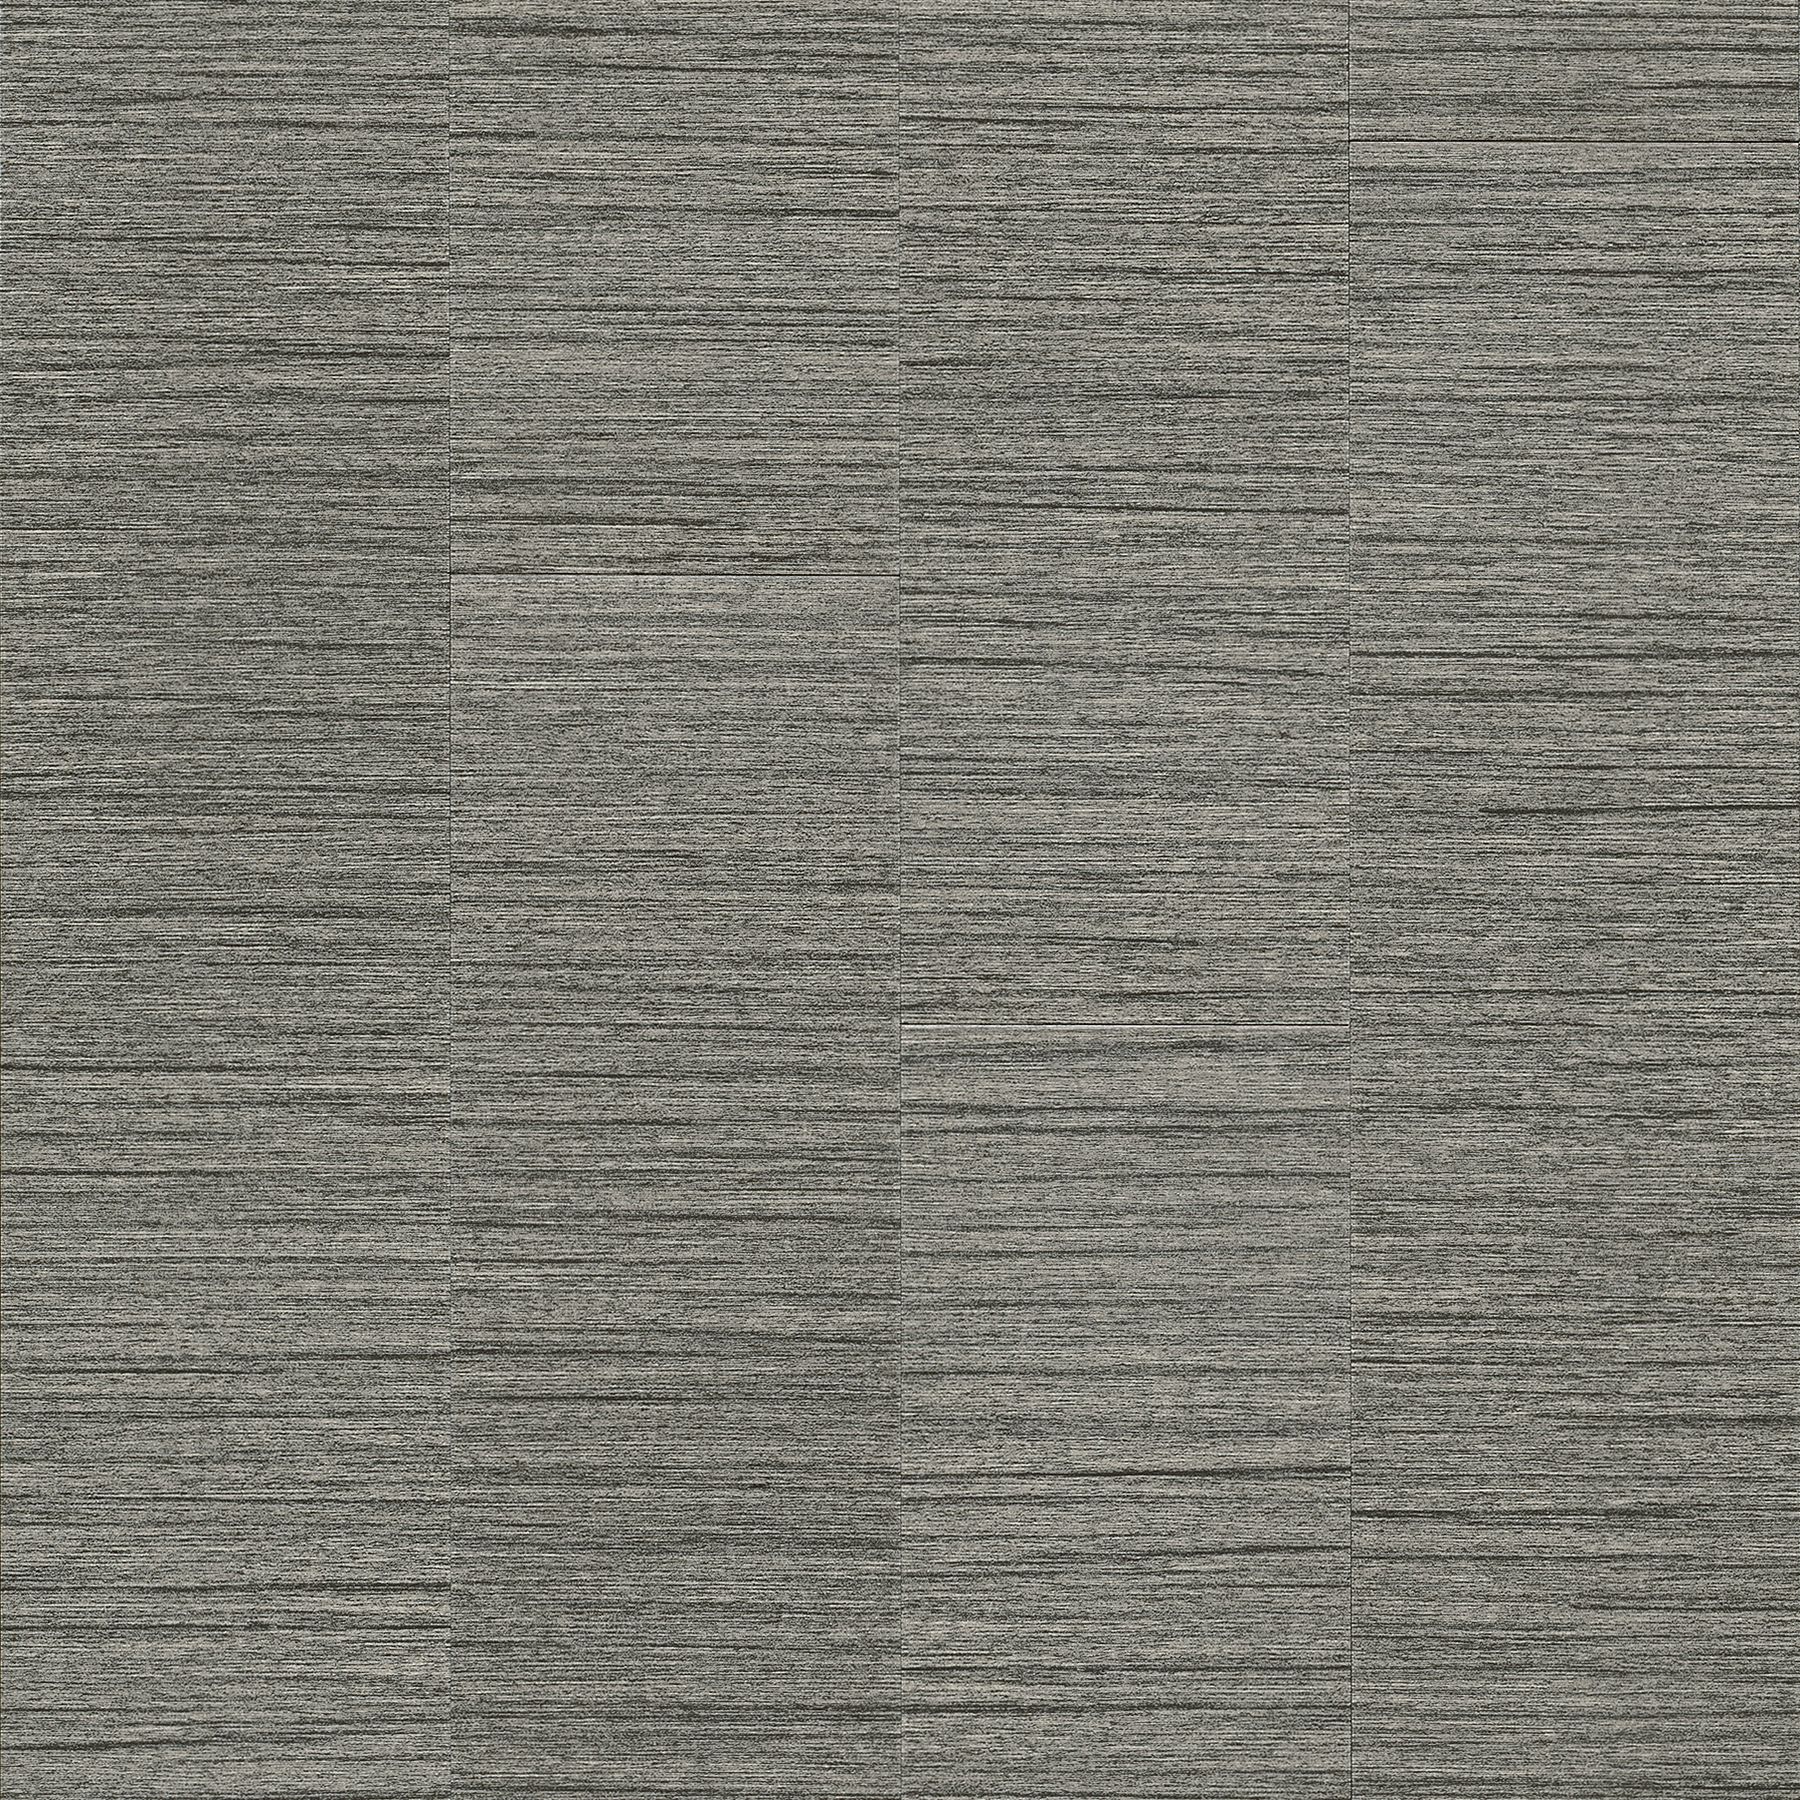 Alchemy Quicksilver: ST921 | Armstrong Flooring Commercial